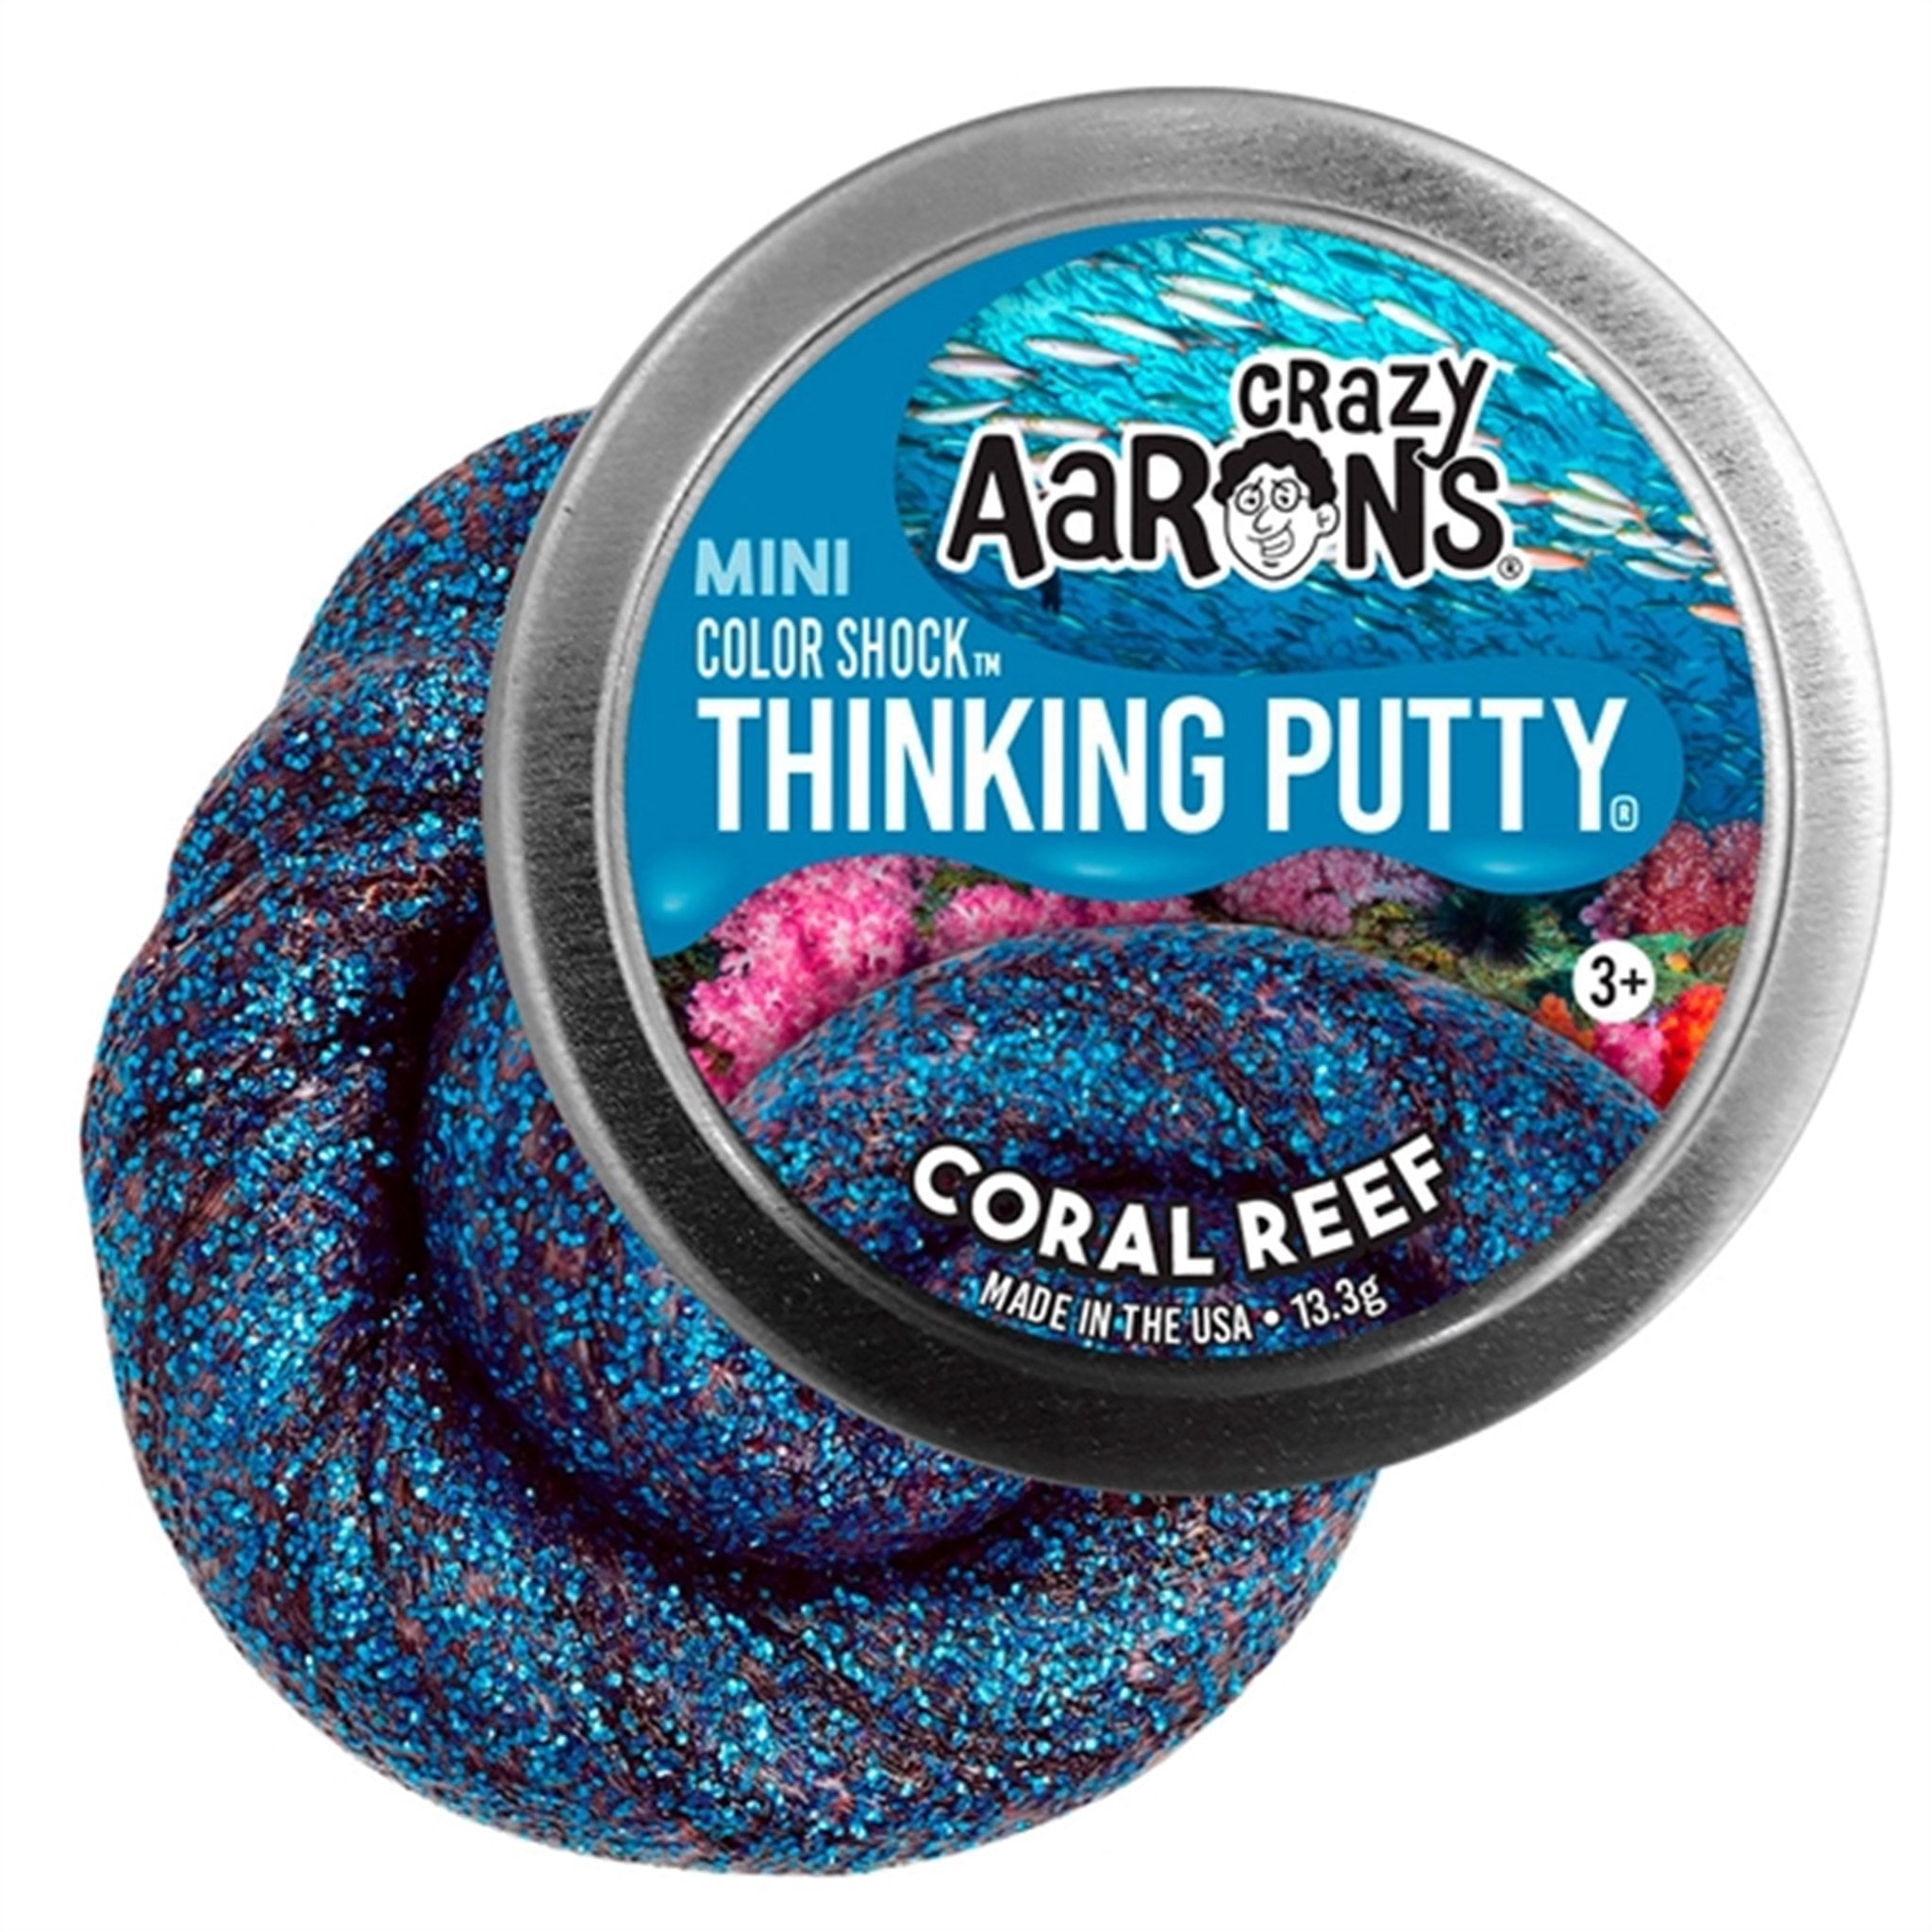 Crazy Aaron's® Thinking Putty Mini Tins - Coral Reef